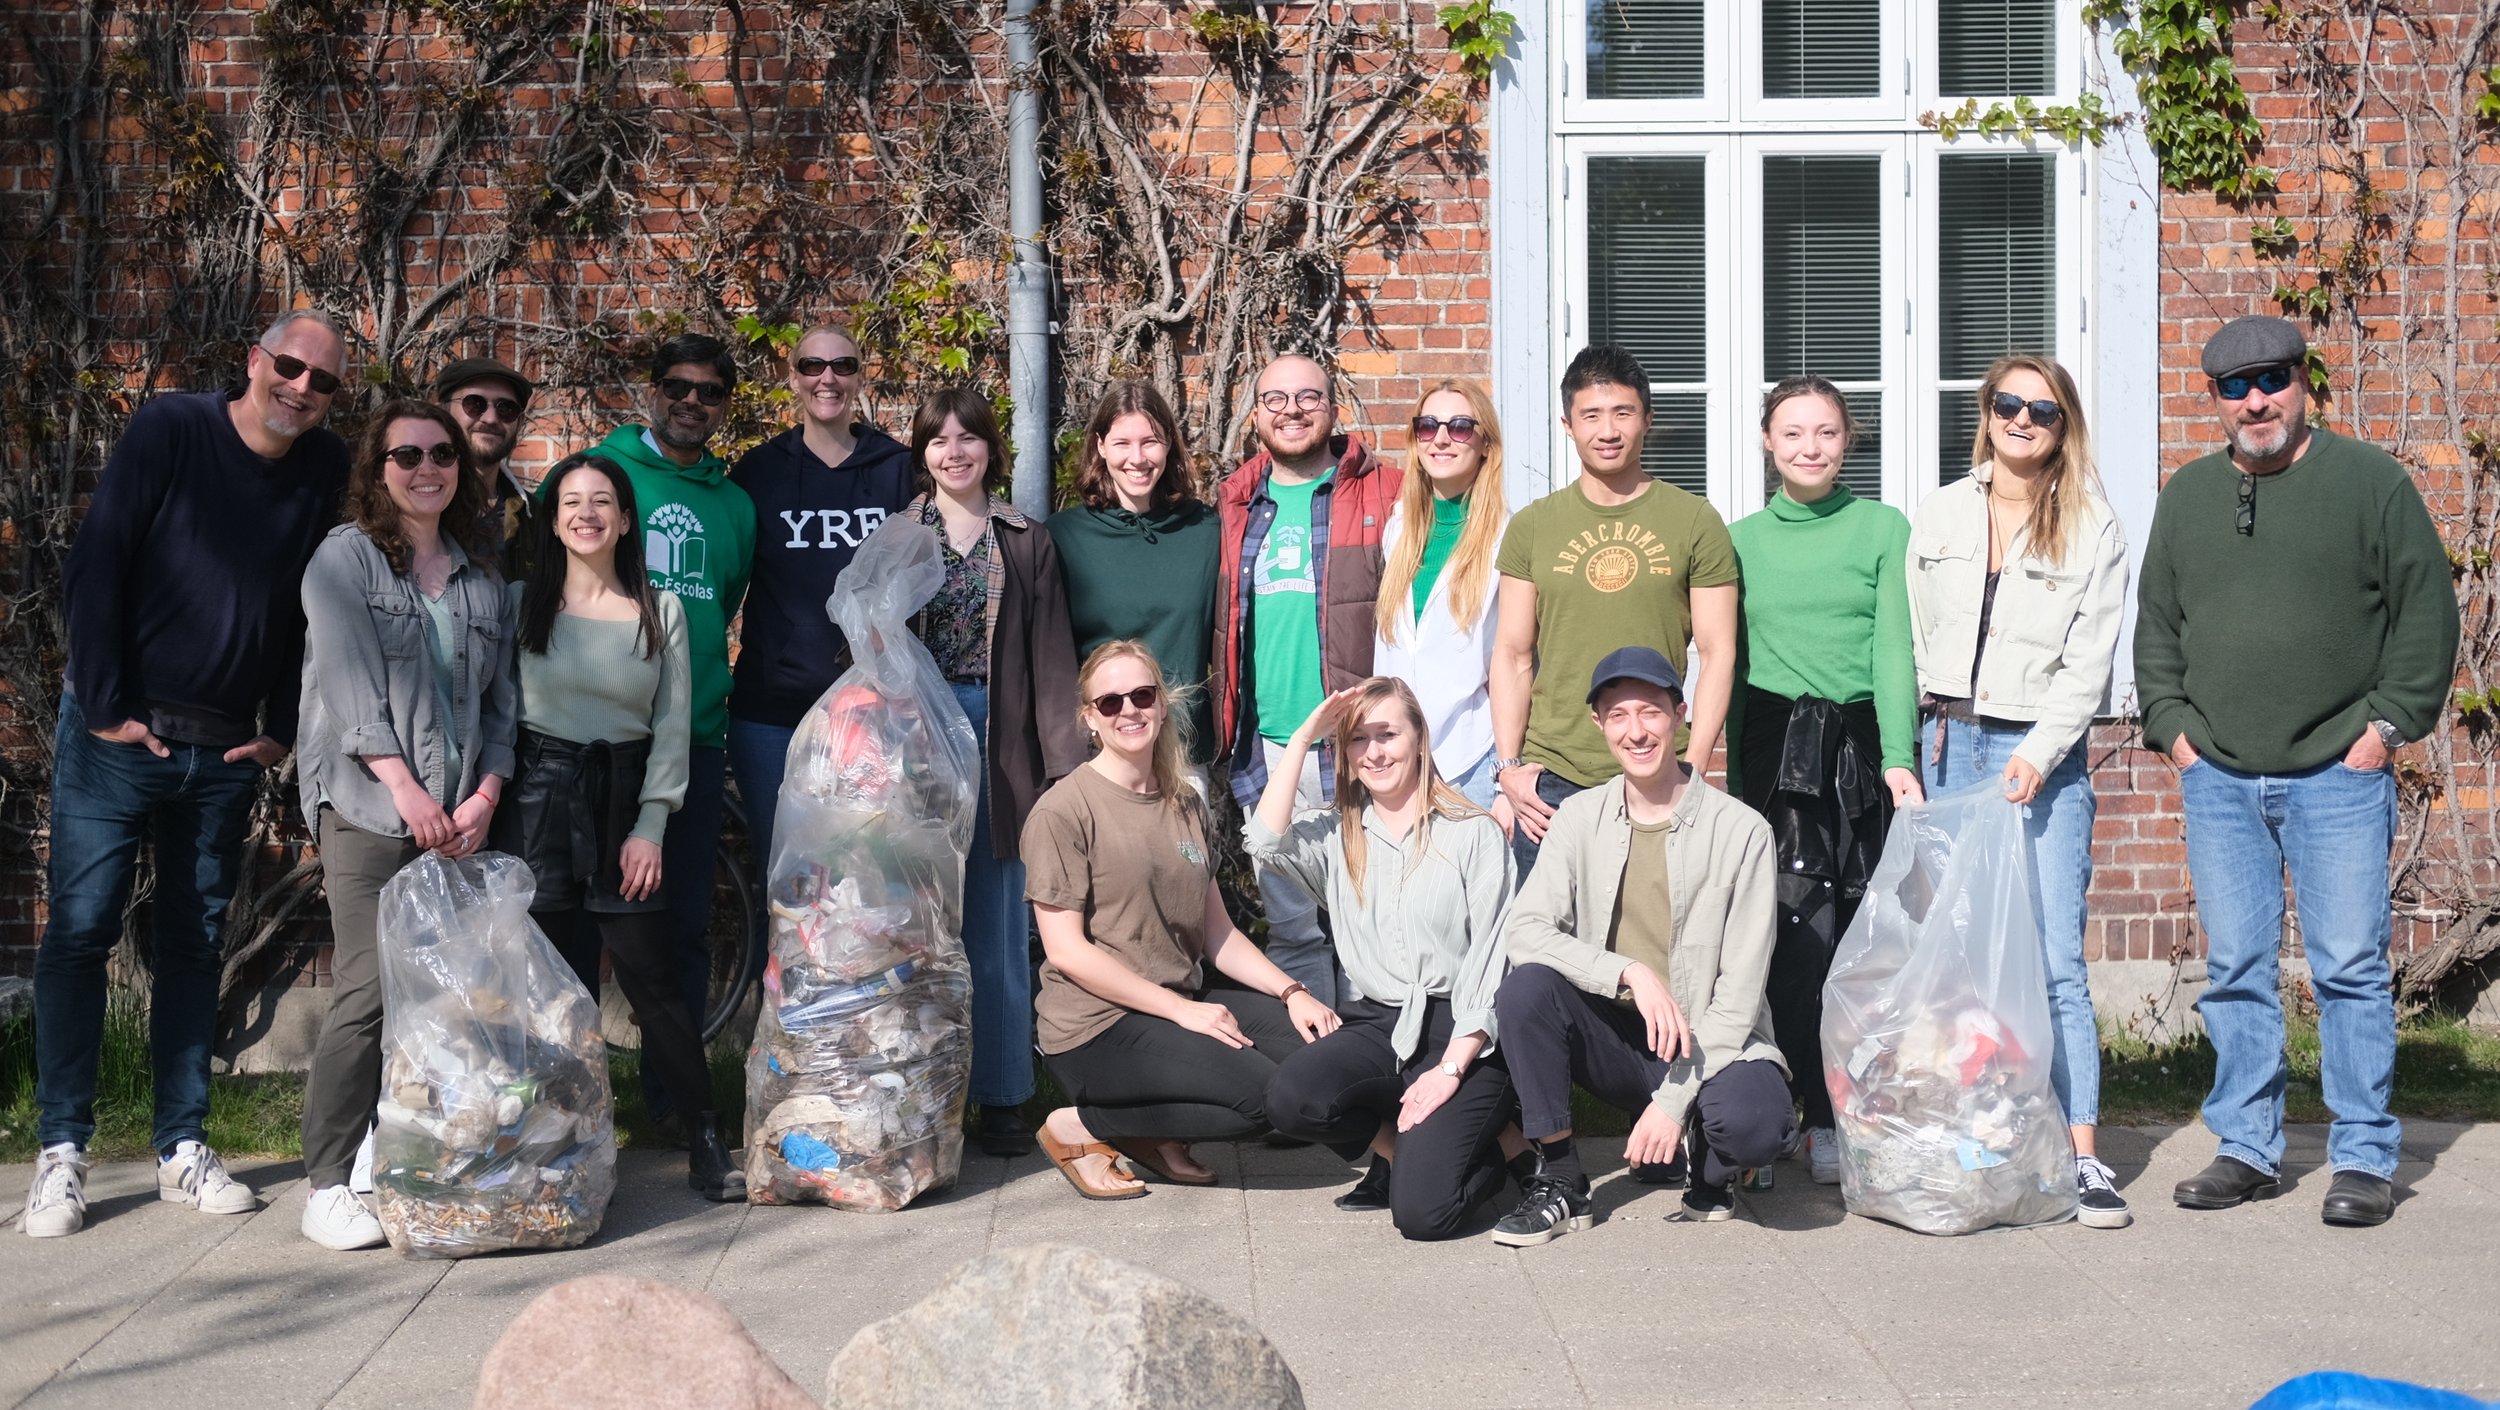 The whole team with the picked litter